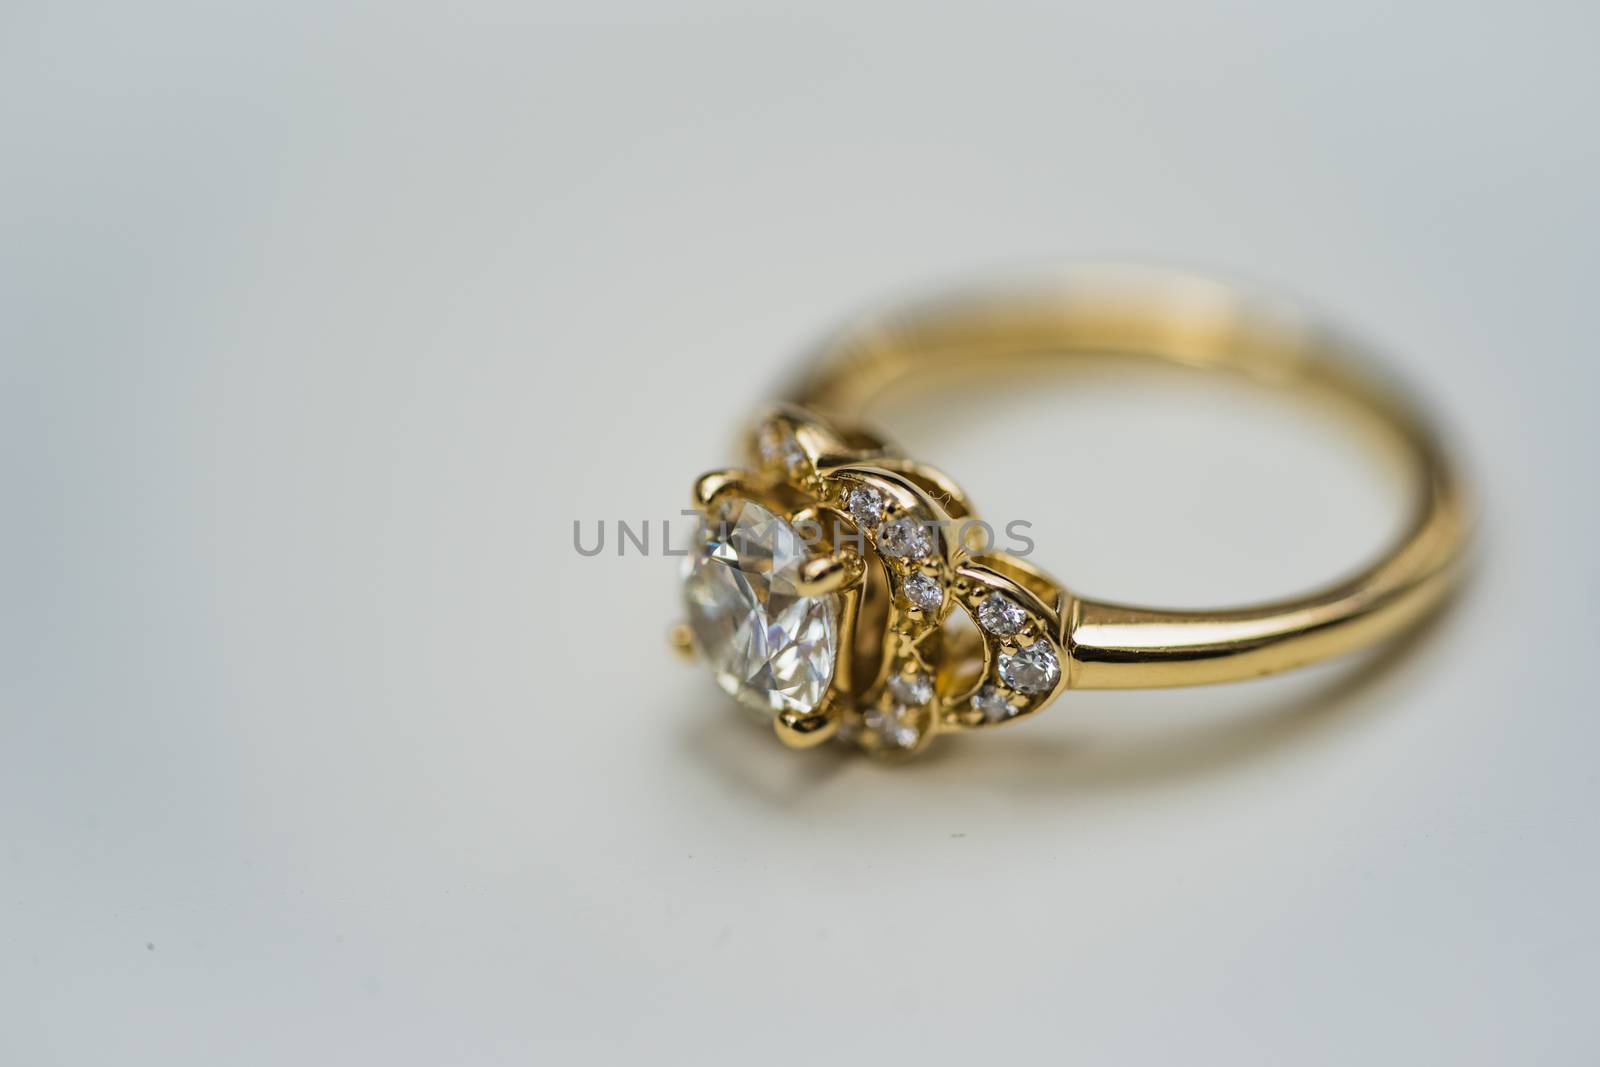 A close up of a beautiful gold diamond engagement ring